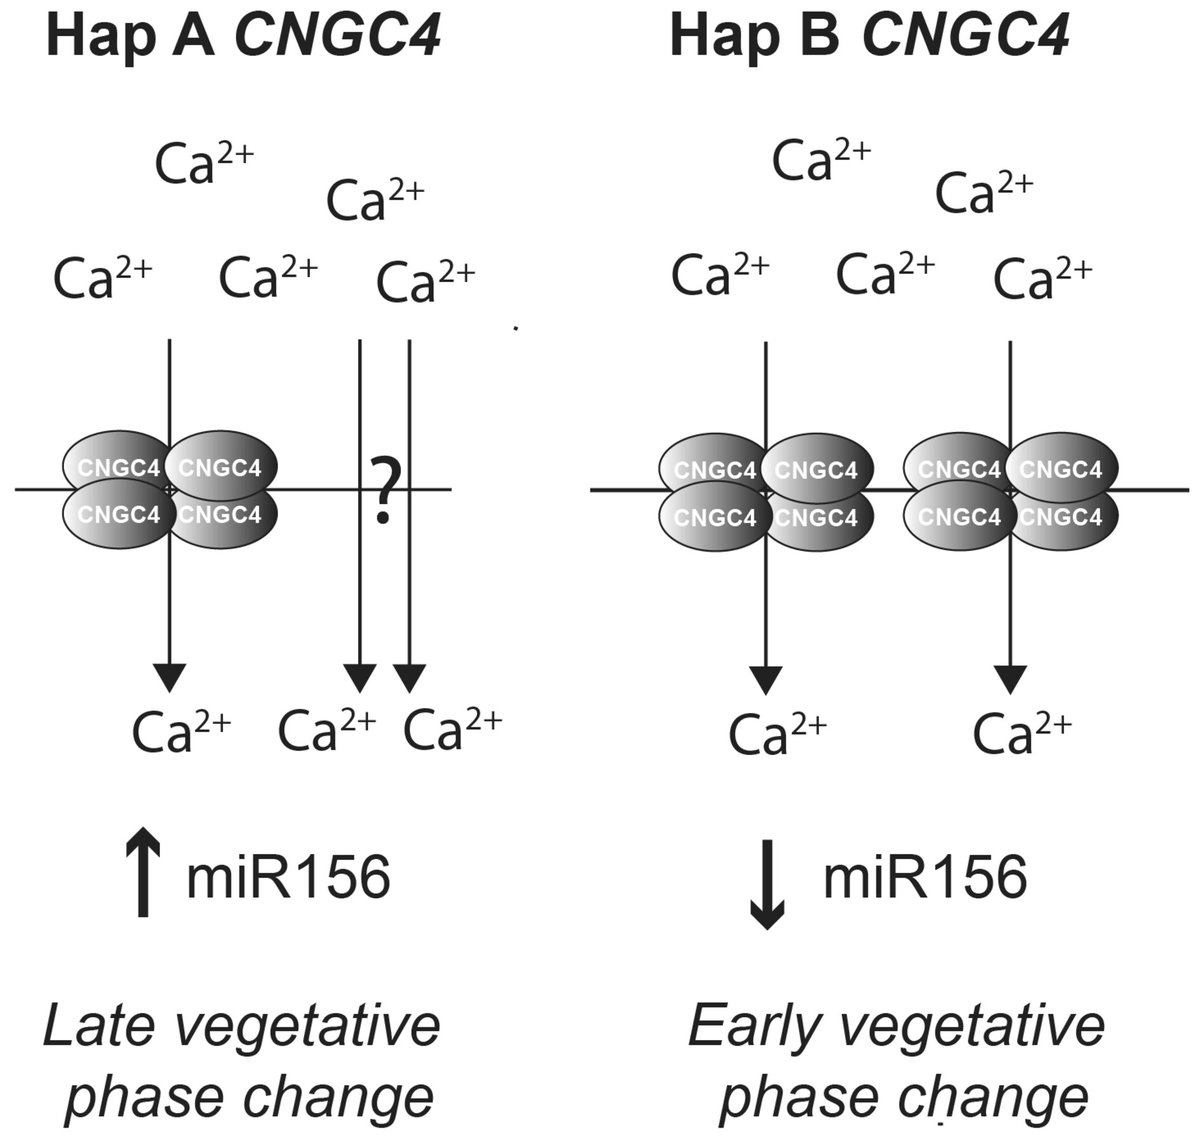 Ca2+ regulates developmental timing in Arabidopsis 📖 ow.ly/Qm8k50Re2bP 👆 Read the Commentary by R. Scott Poethig on this article by Wang, et al. 👇 📖 ow.ly/zYsT50Re2bO